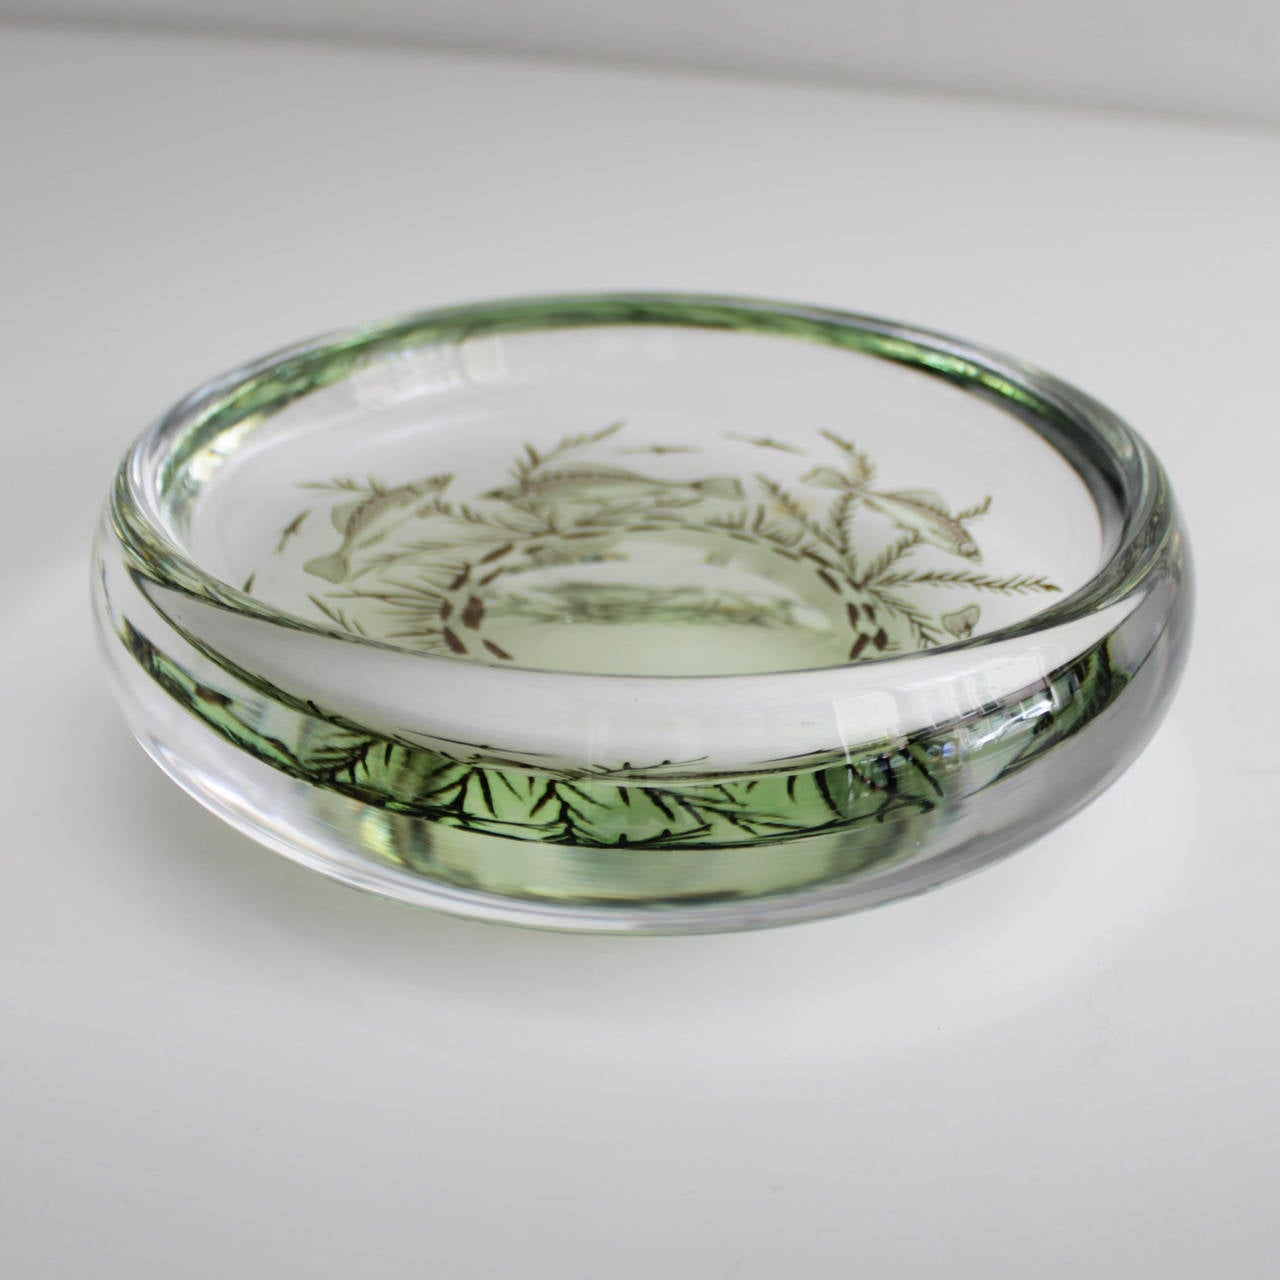 Orrefors 'Graal' bowl by Edward Hald, Sweden. This bowl or ashtray is hard to find. Thick walls of clear glass encasing a design of fish swimming, etched Orrefors Graal Edward Hald on the base.